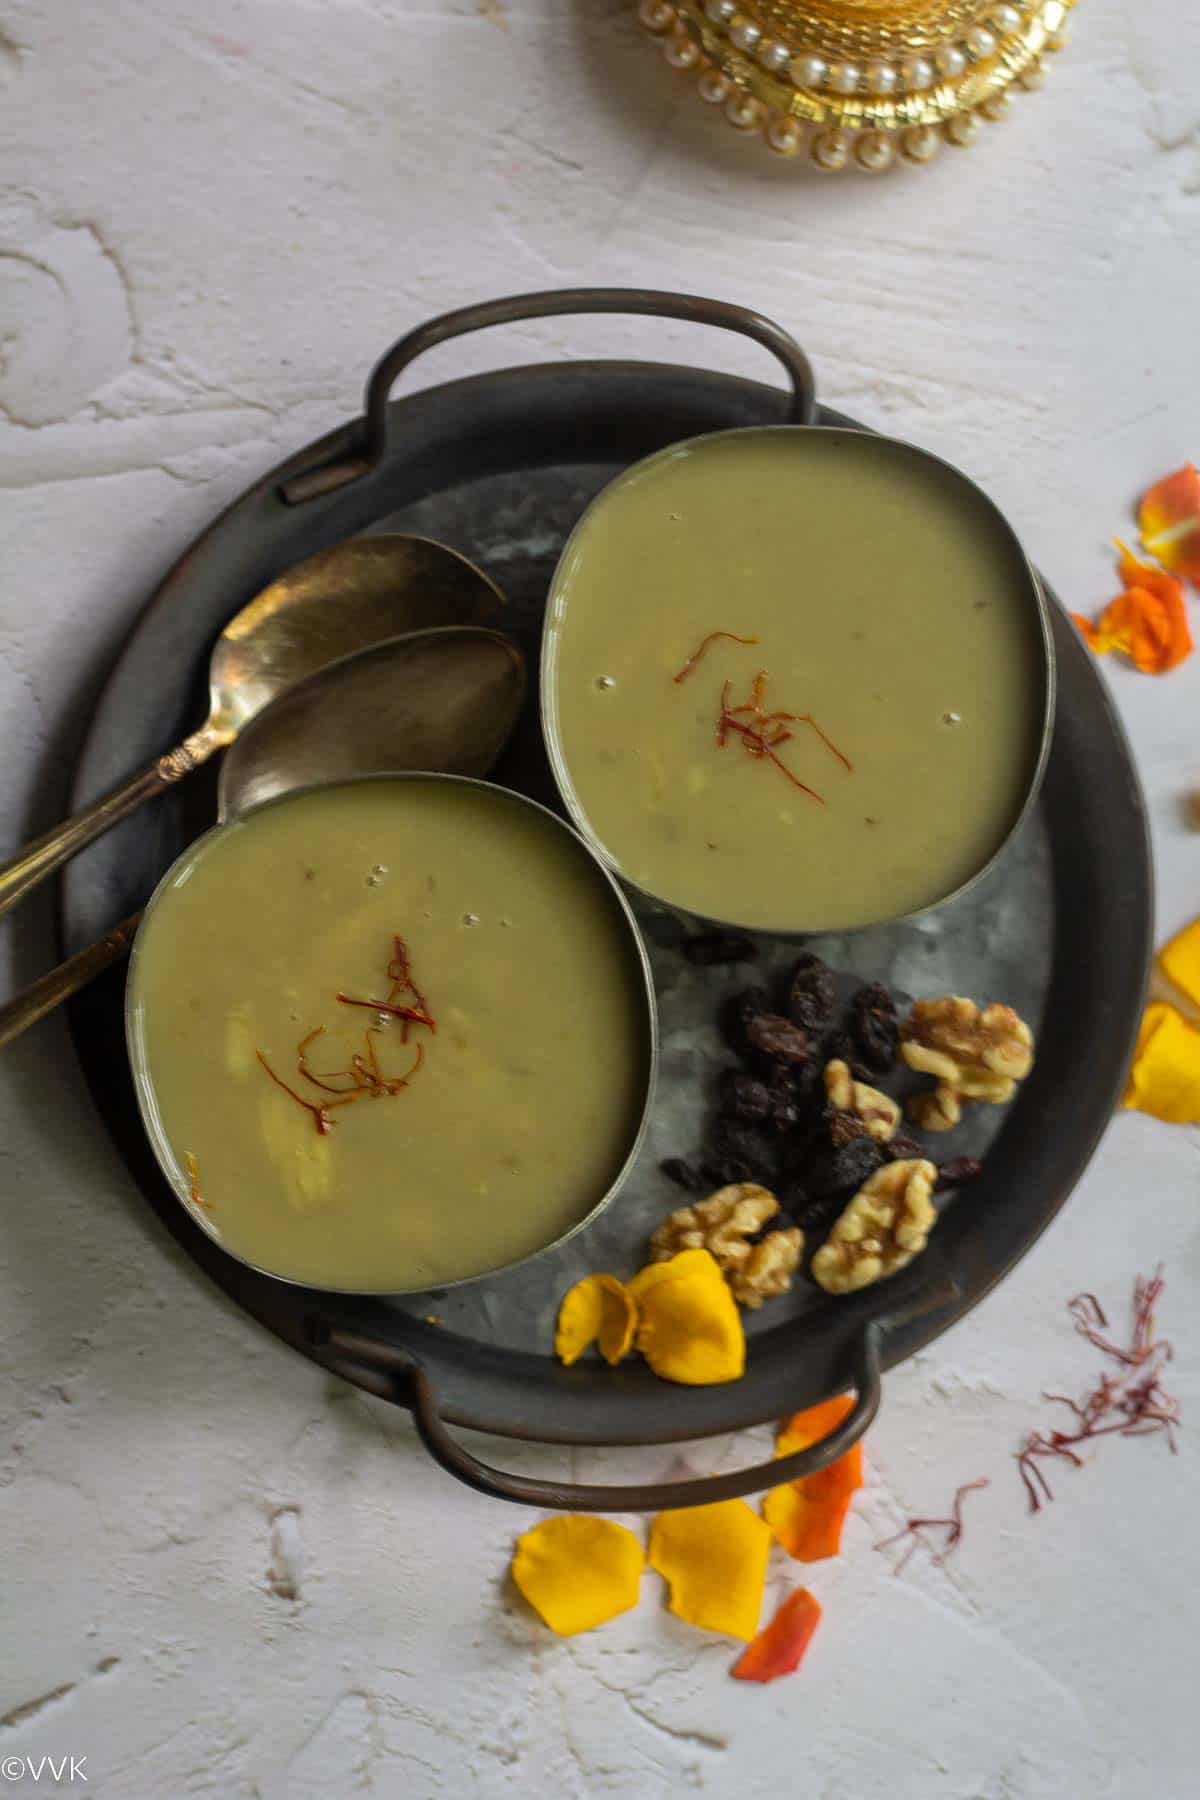 sakkaravalli kizhangu payasam served in two bowls placed on iron tray with nuts on the side